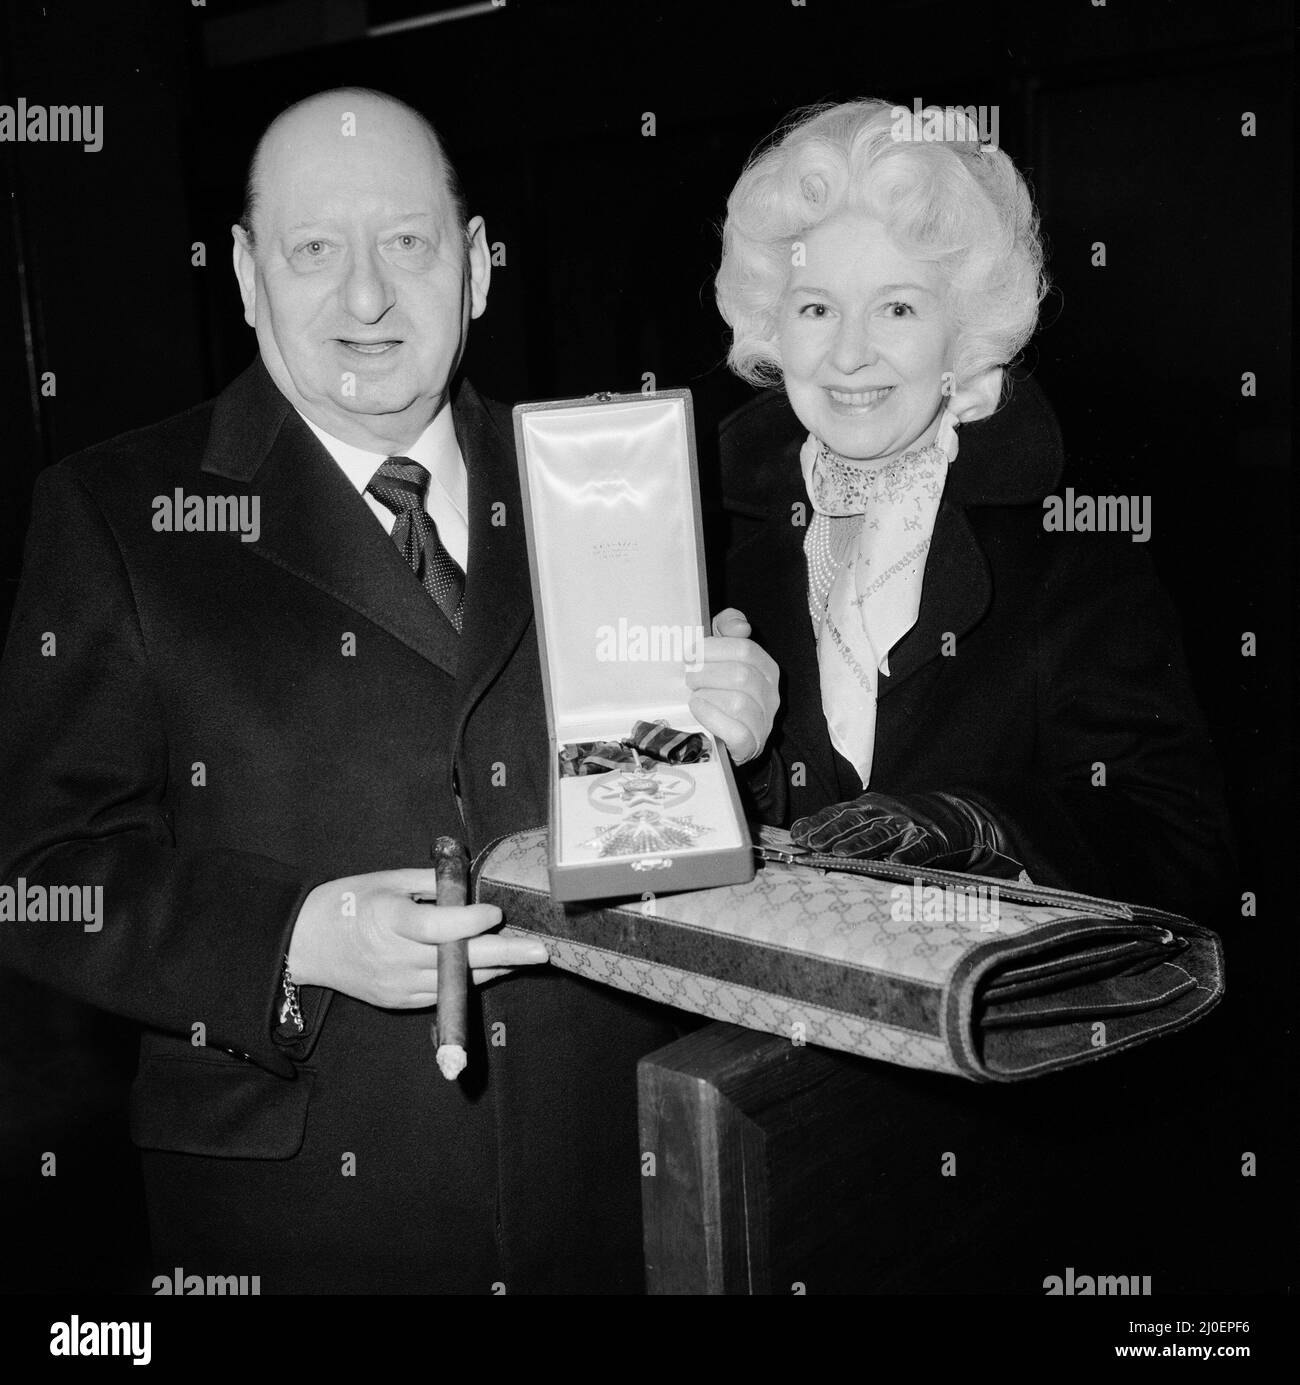 Media Mogul Lew Grade, head of ATV television, arrives at Heathrow Airport with his wife Lady Grade on return from Rome where he was honoured with the title of Commander of the Order of Silvester by the Pope in recognition of his religious films. 16th January 1979. Stock Photo